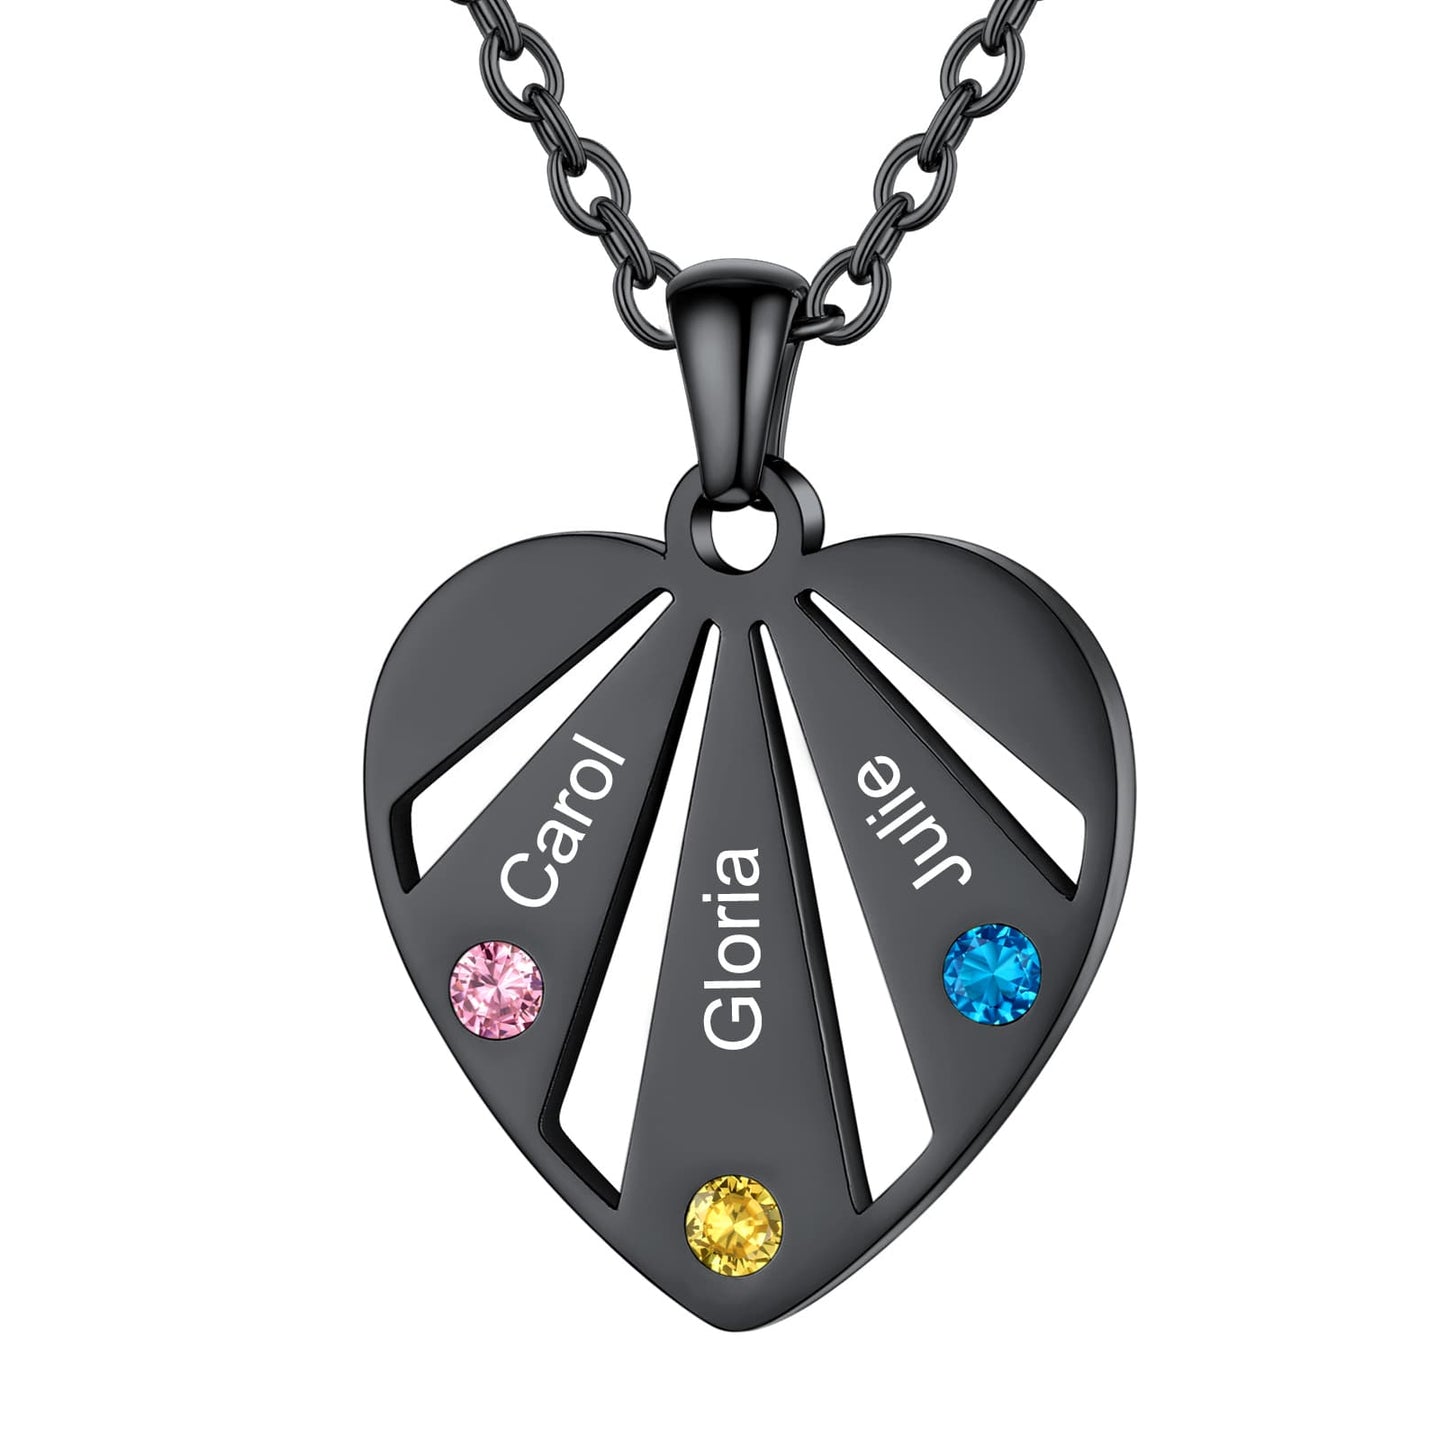 Personalized Engraved Heart Birthstone Necklace 3 stones black